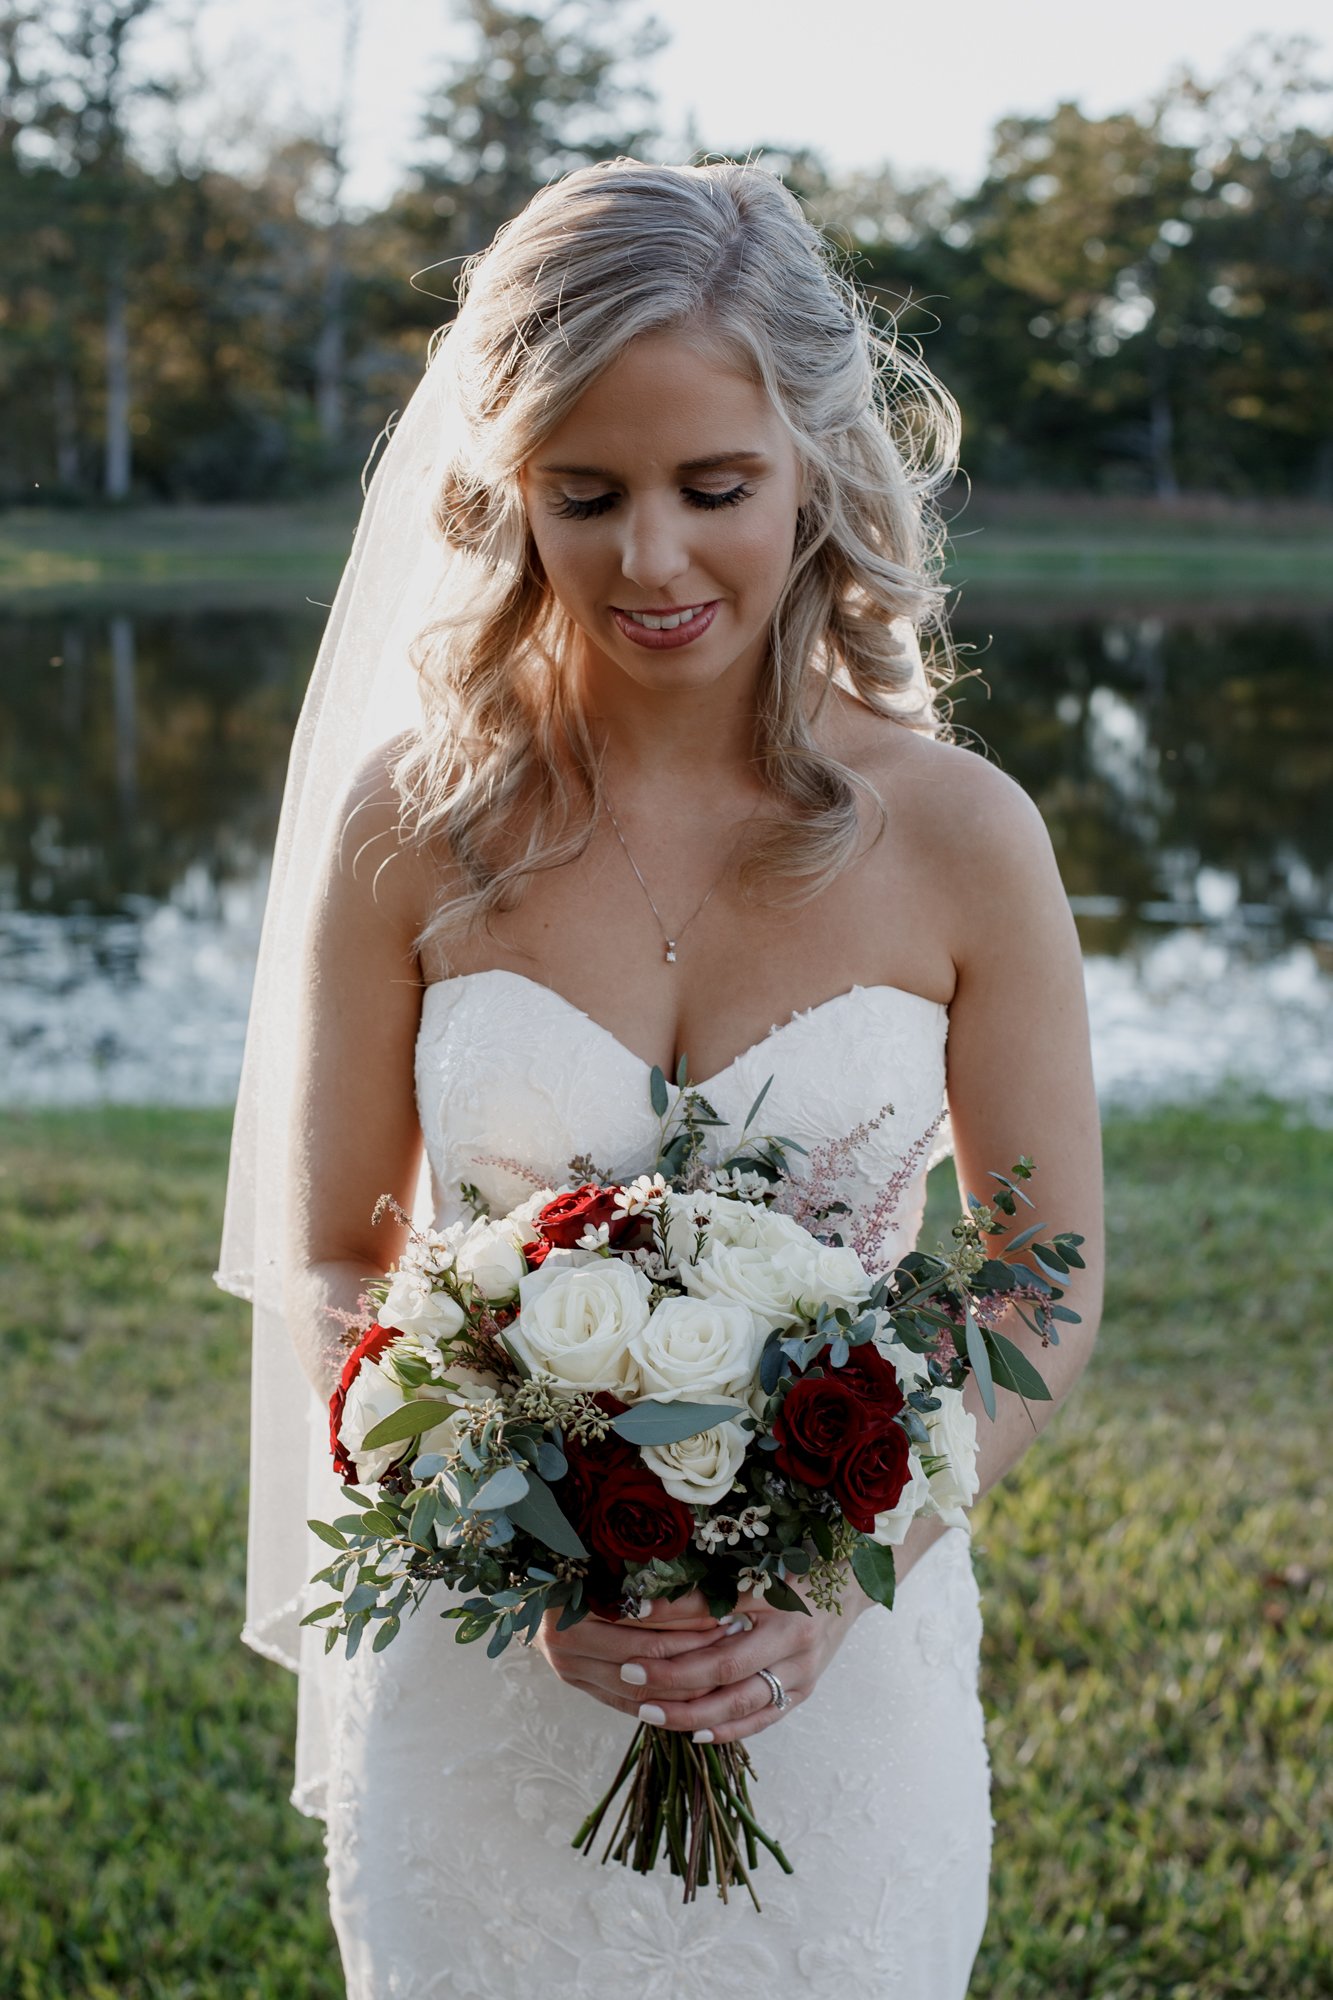 Sunset bridal portraits by the lake. Wedding at The Vine (New Ulm, TX)